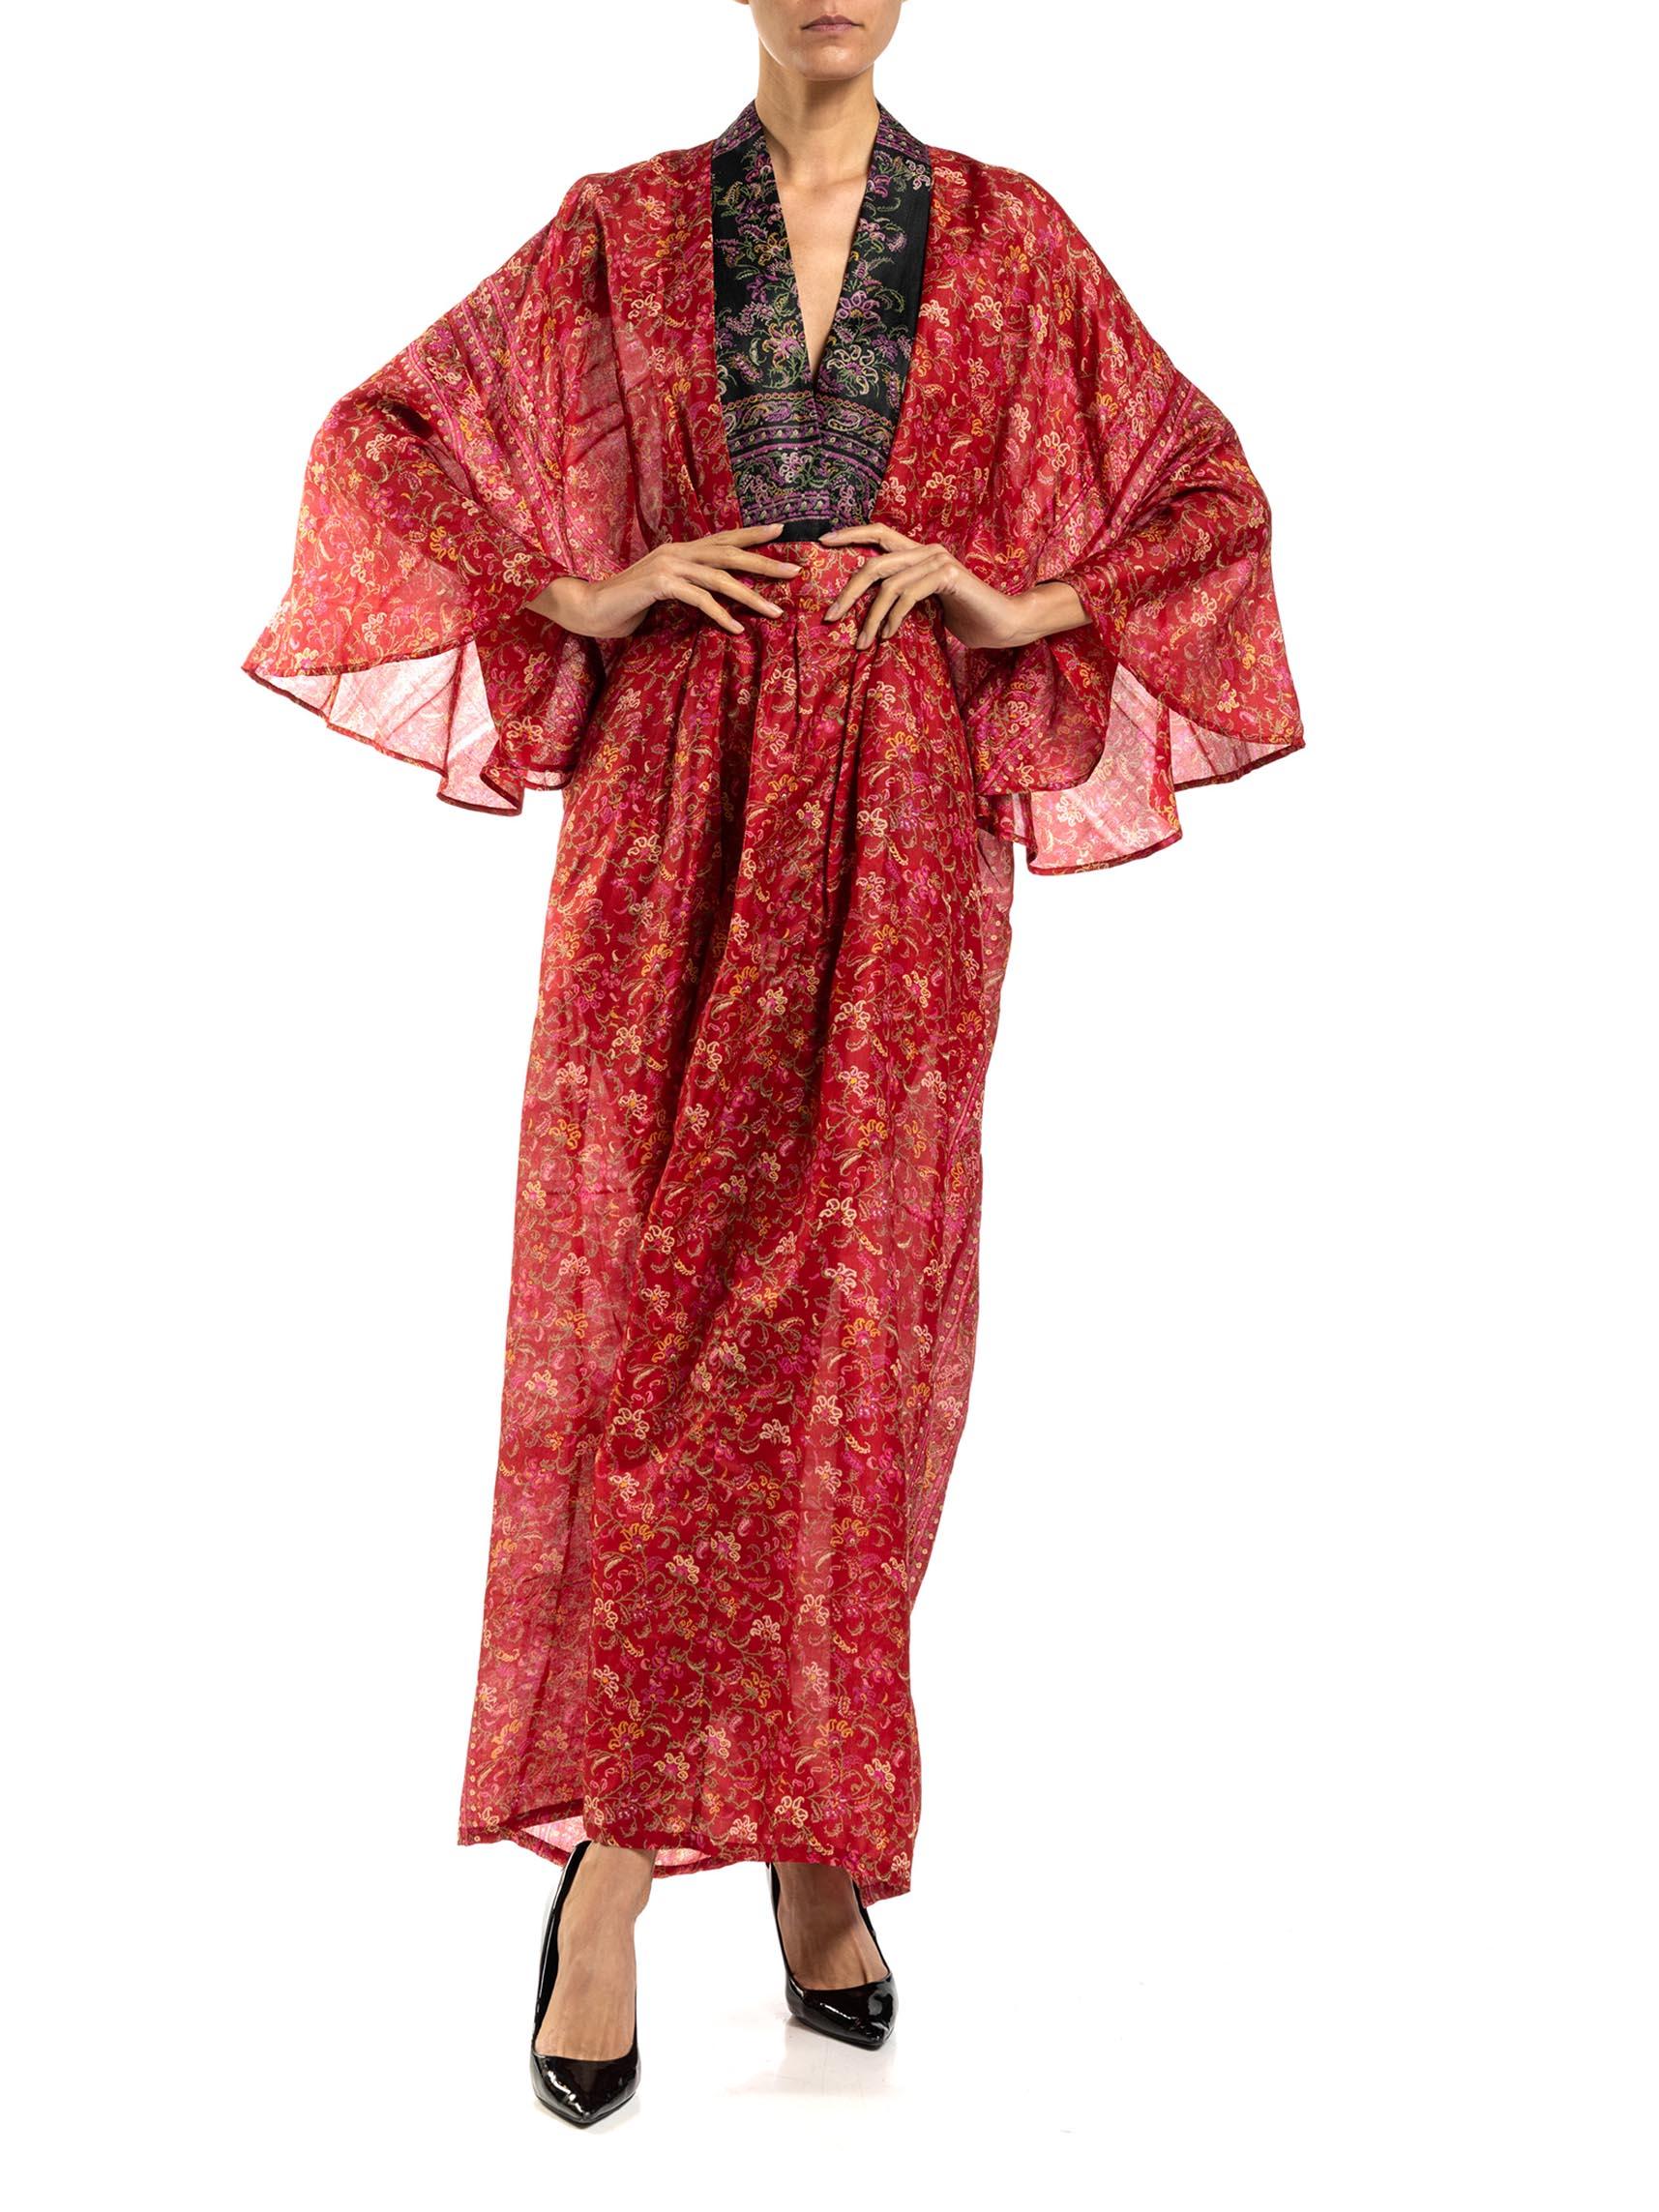 MORPHEW COLLECTION Red & Black Paisley Silk Floral Kaftan Made From Vintage Sari For Sale 6